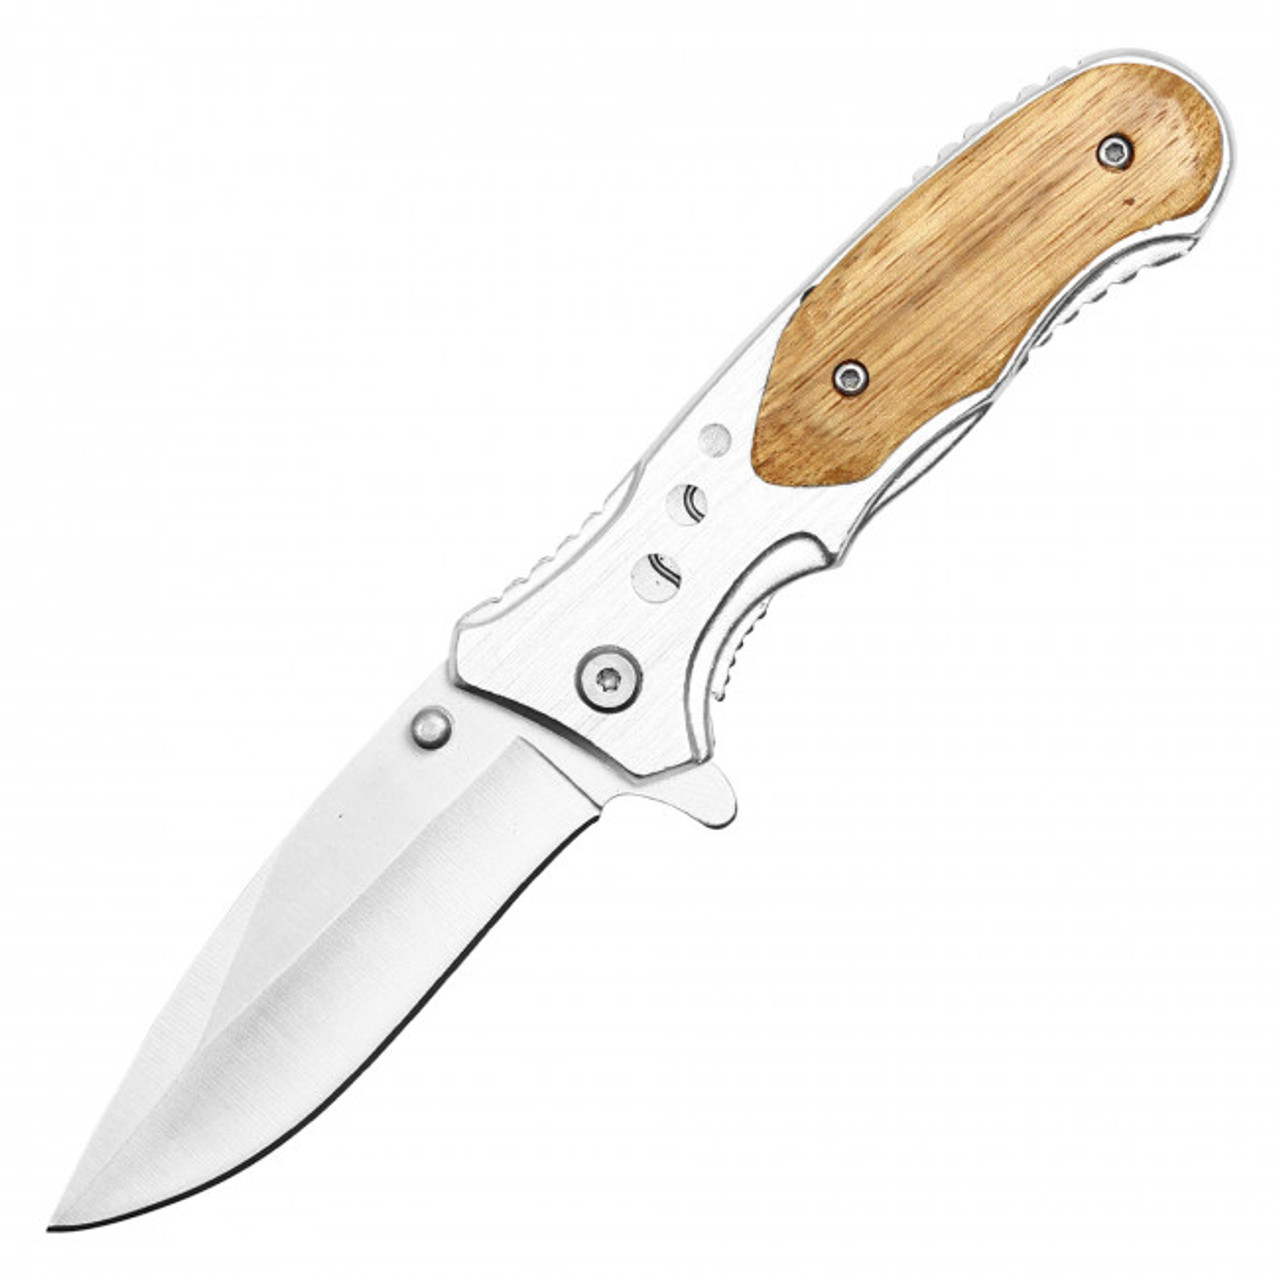 7.75" Assisted Pocket Knife W/ Chrome Wooden Handle